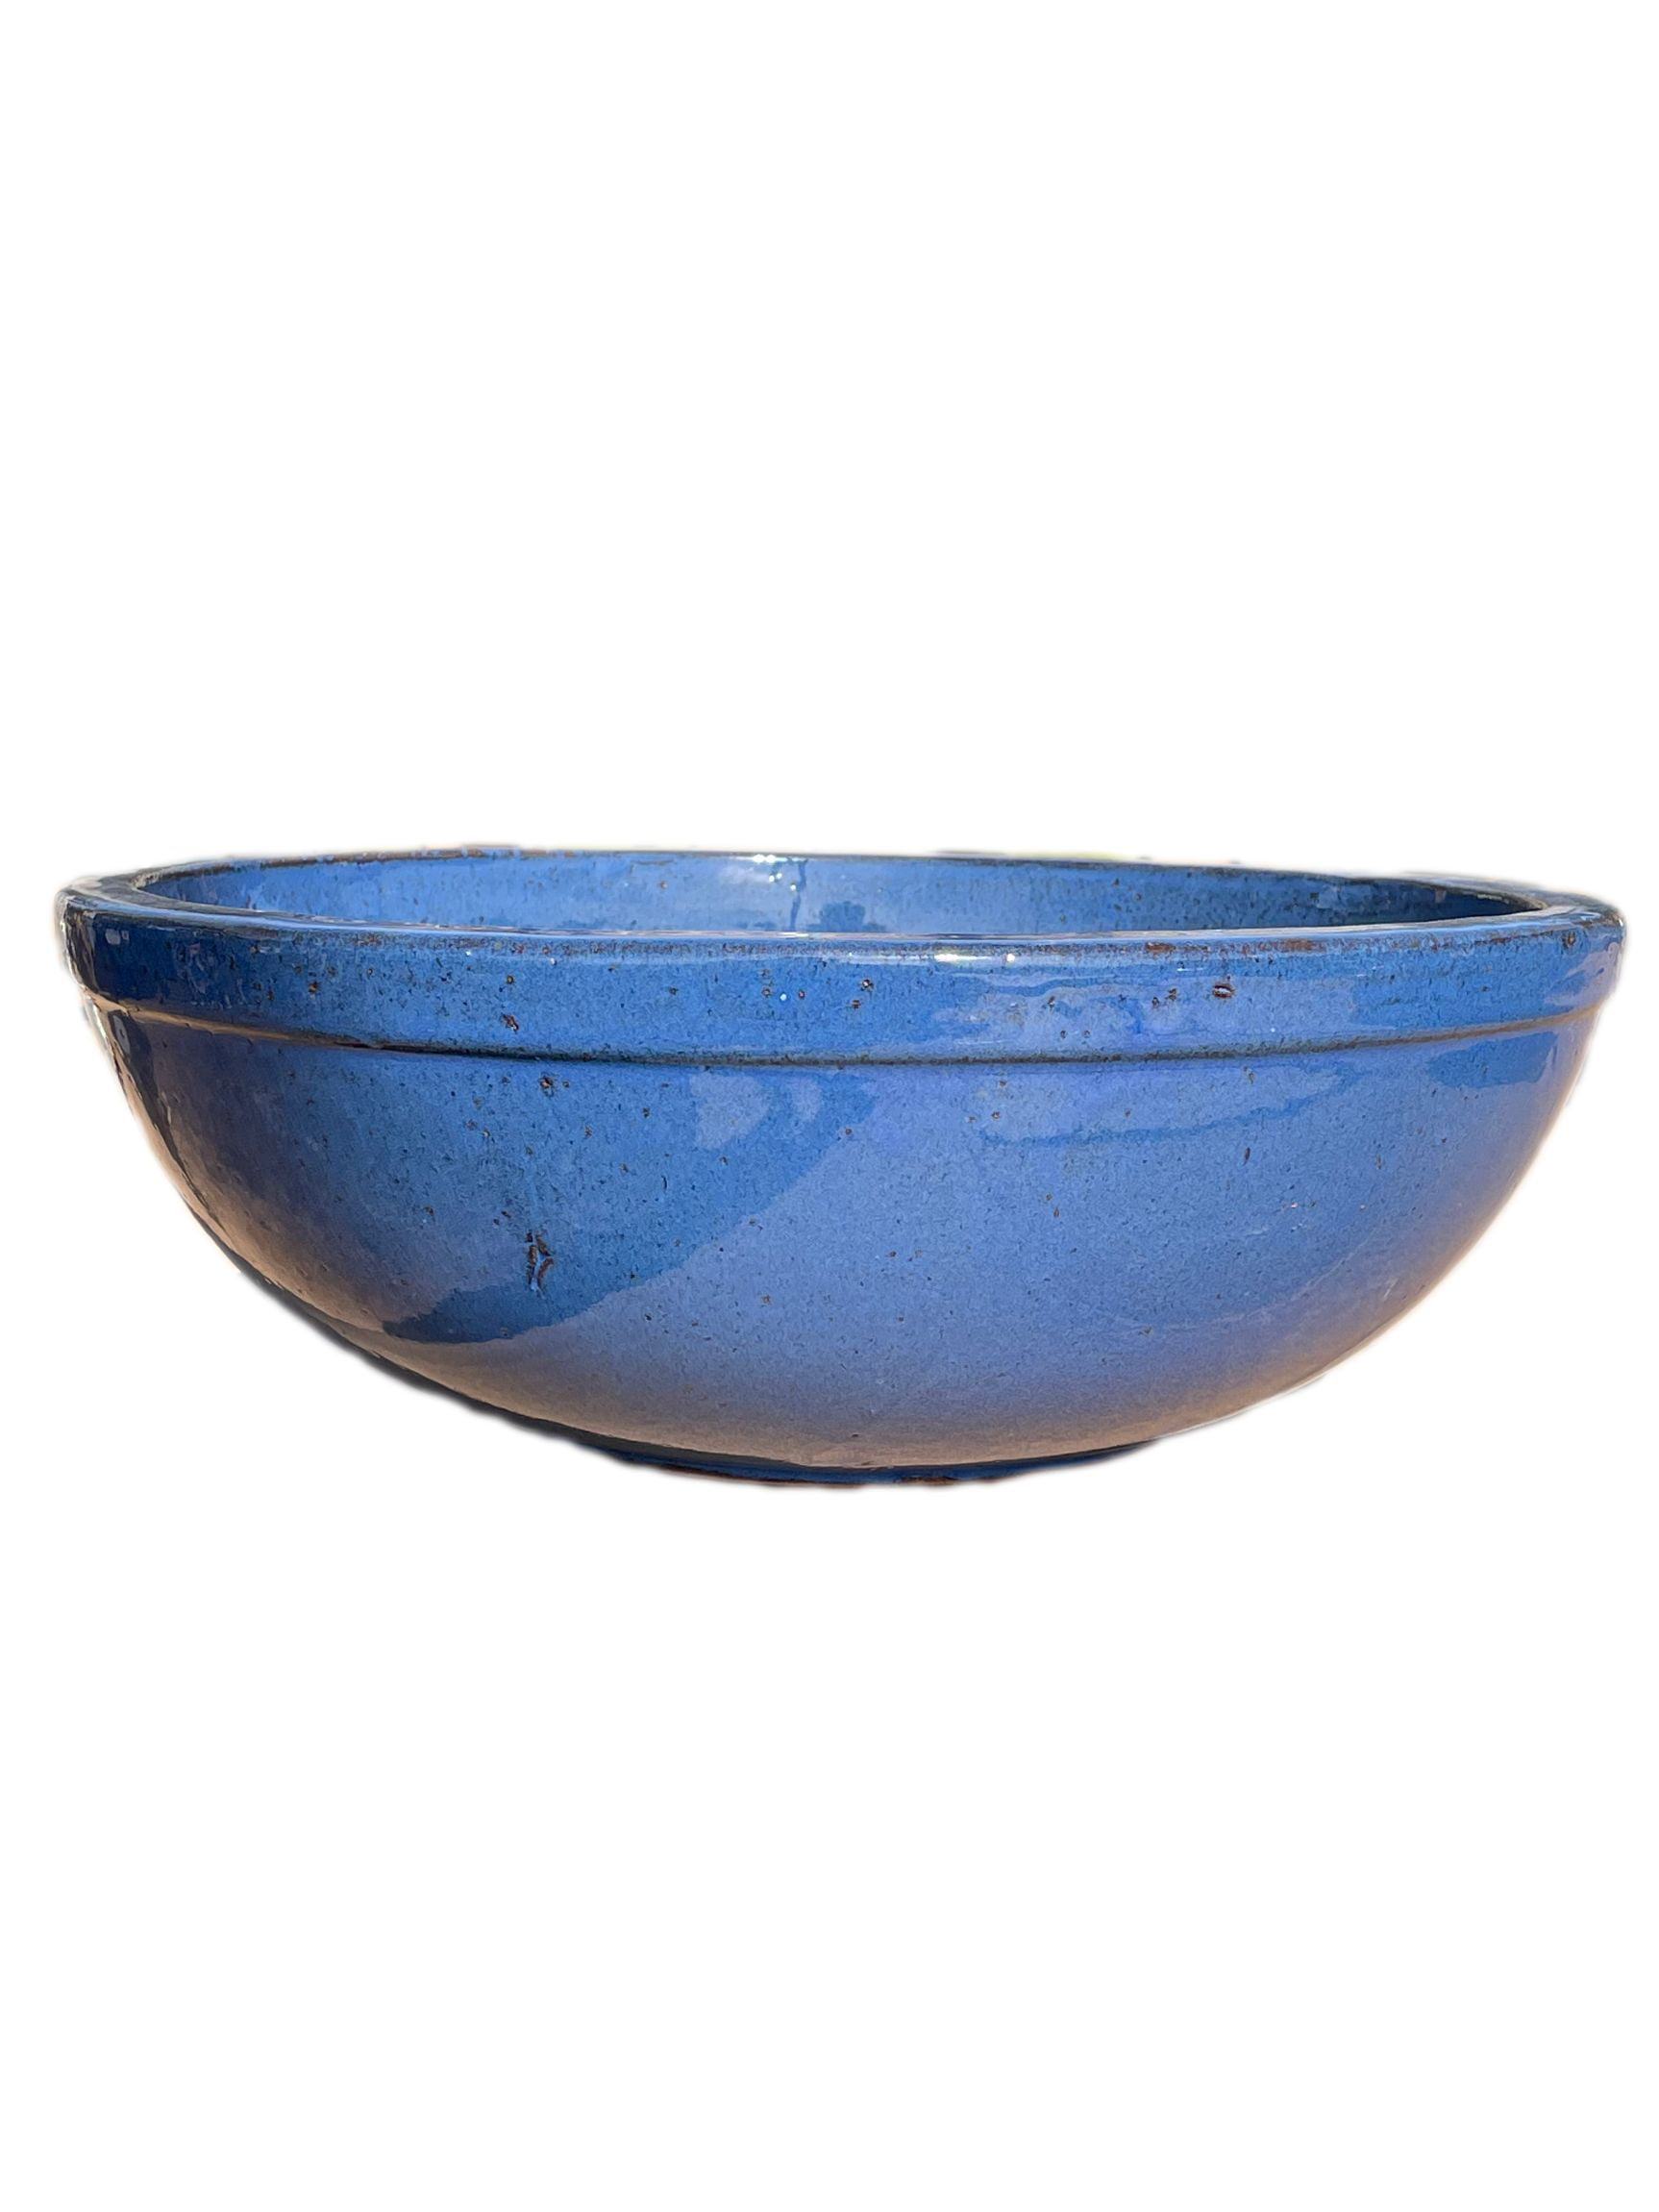 Handmade Ready to ship Great gift idea Blue and green glaze Pottery condiment bowl Clay ring holder Ceramic prep dish